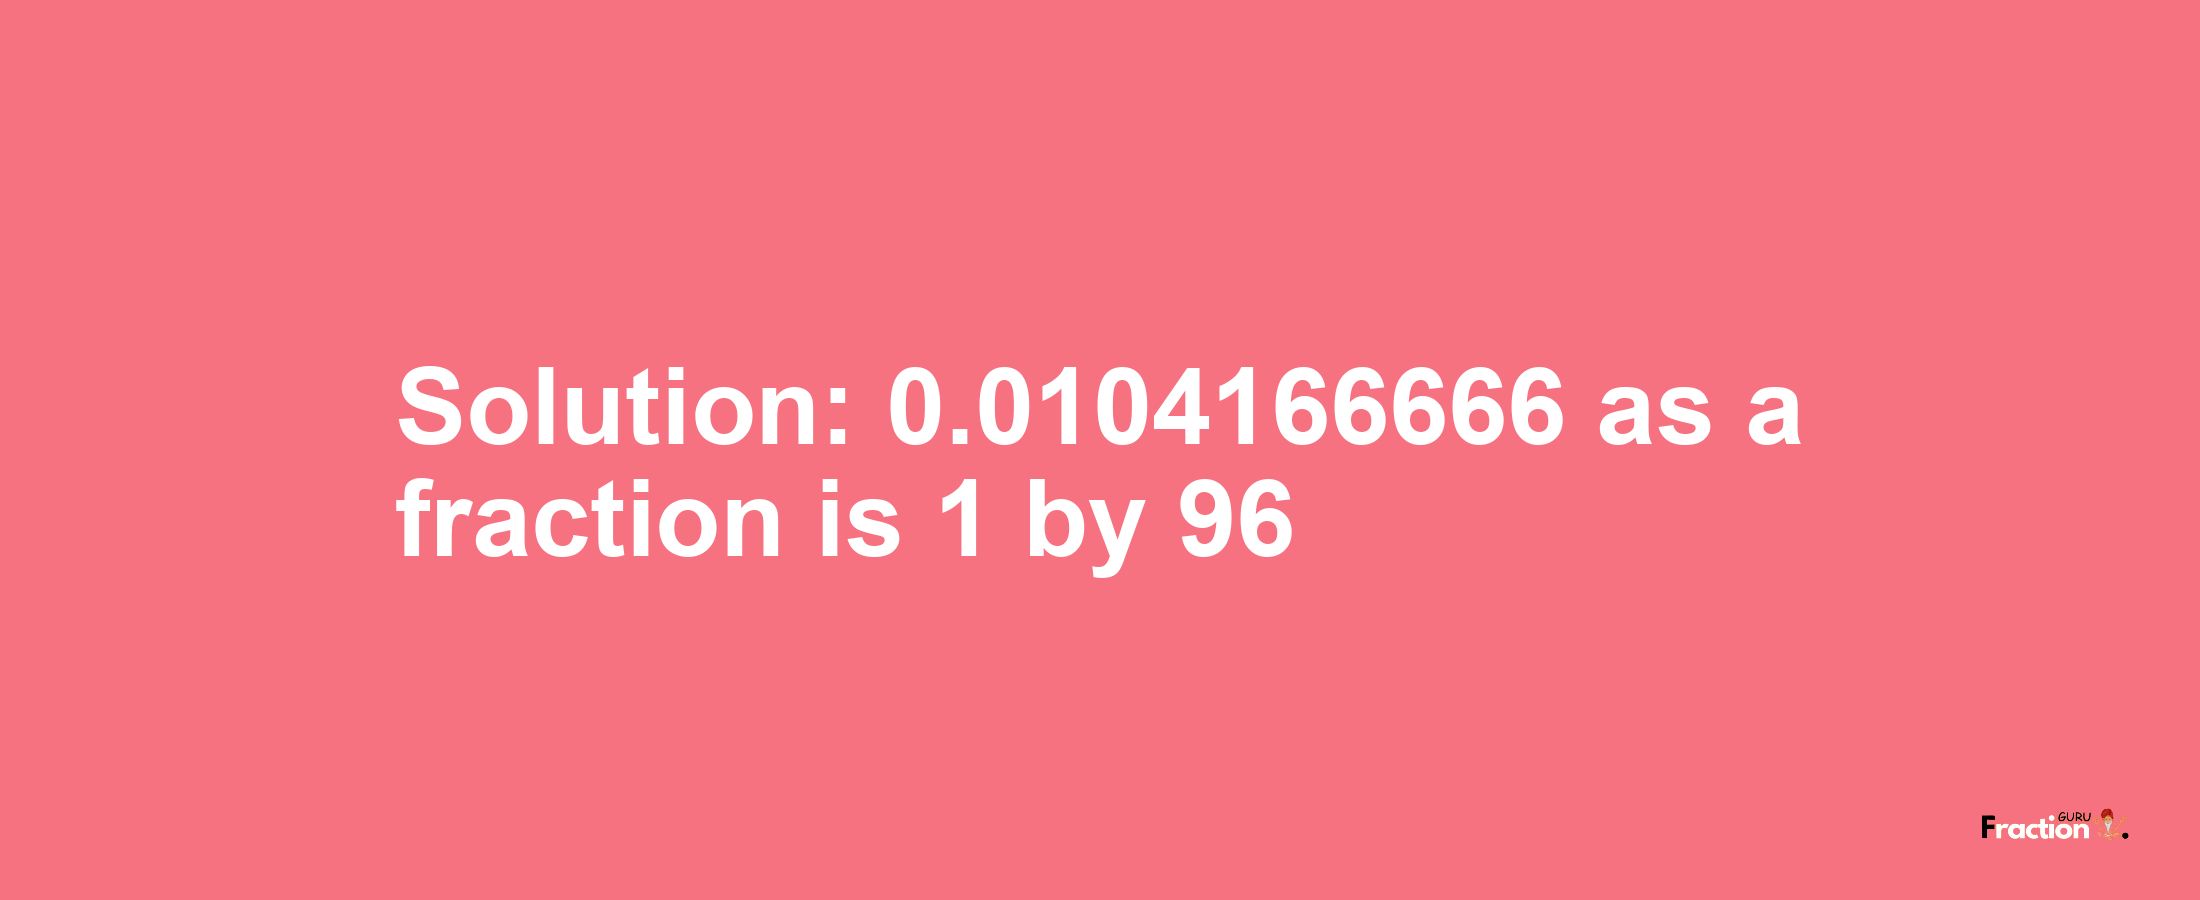 Solution:0.0104166666 as a fraction is 1/96